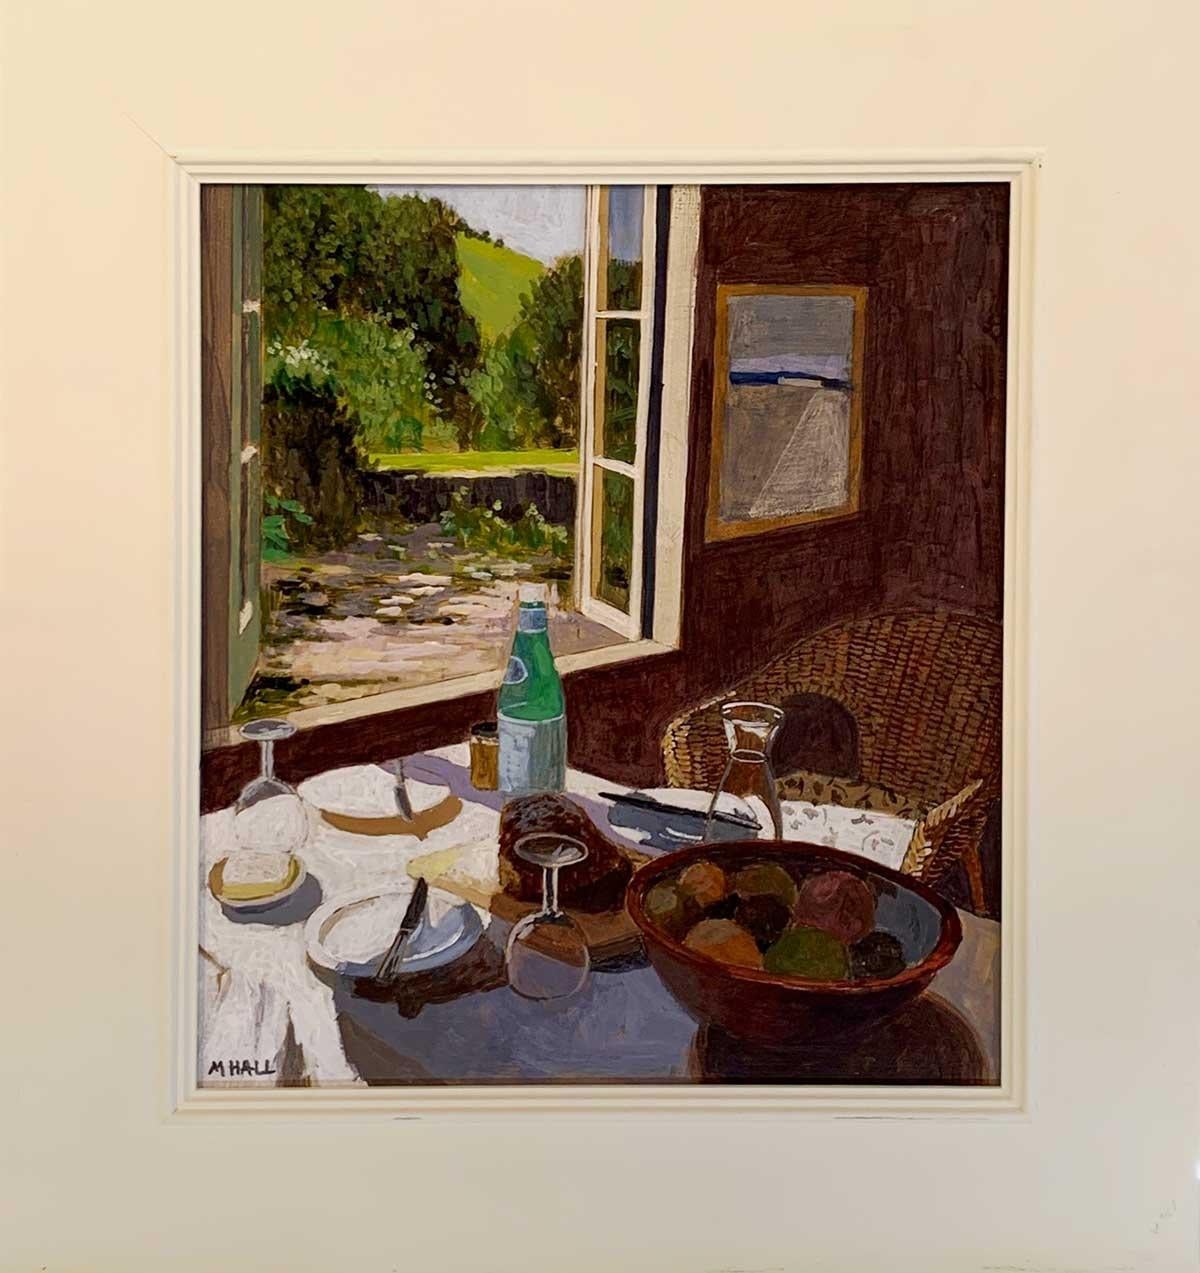 Lunch with Garden View - contemporary still-life window landscape room interior - Painting by Mike Hall